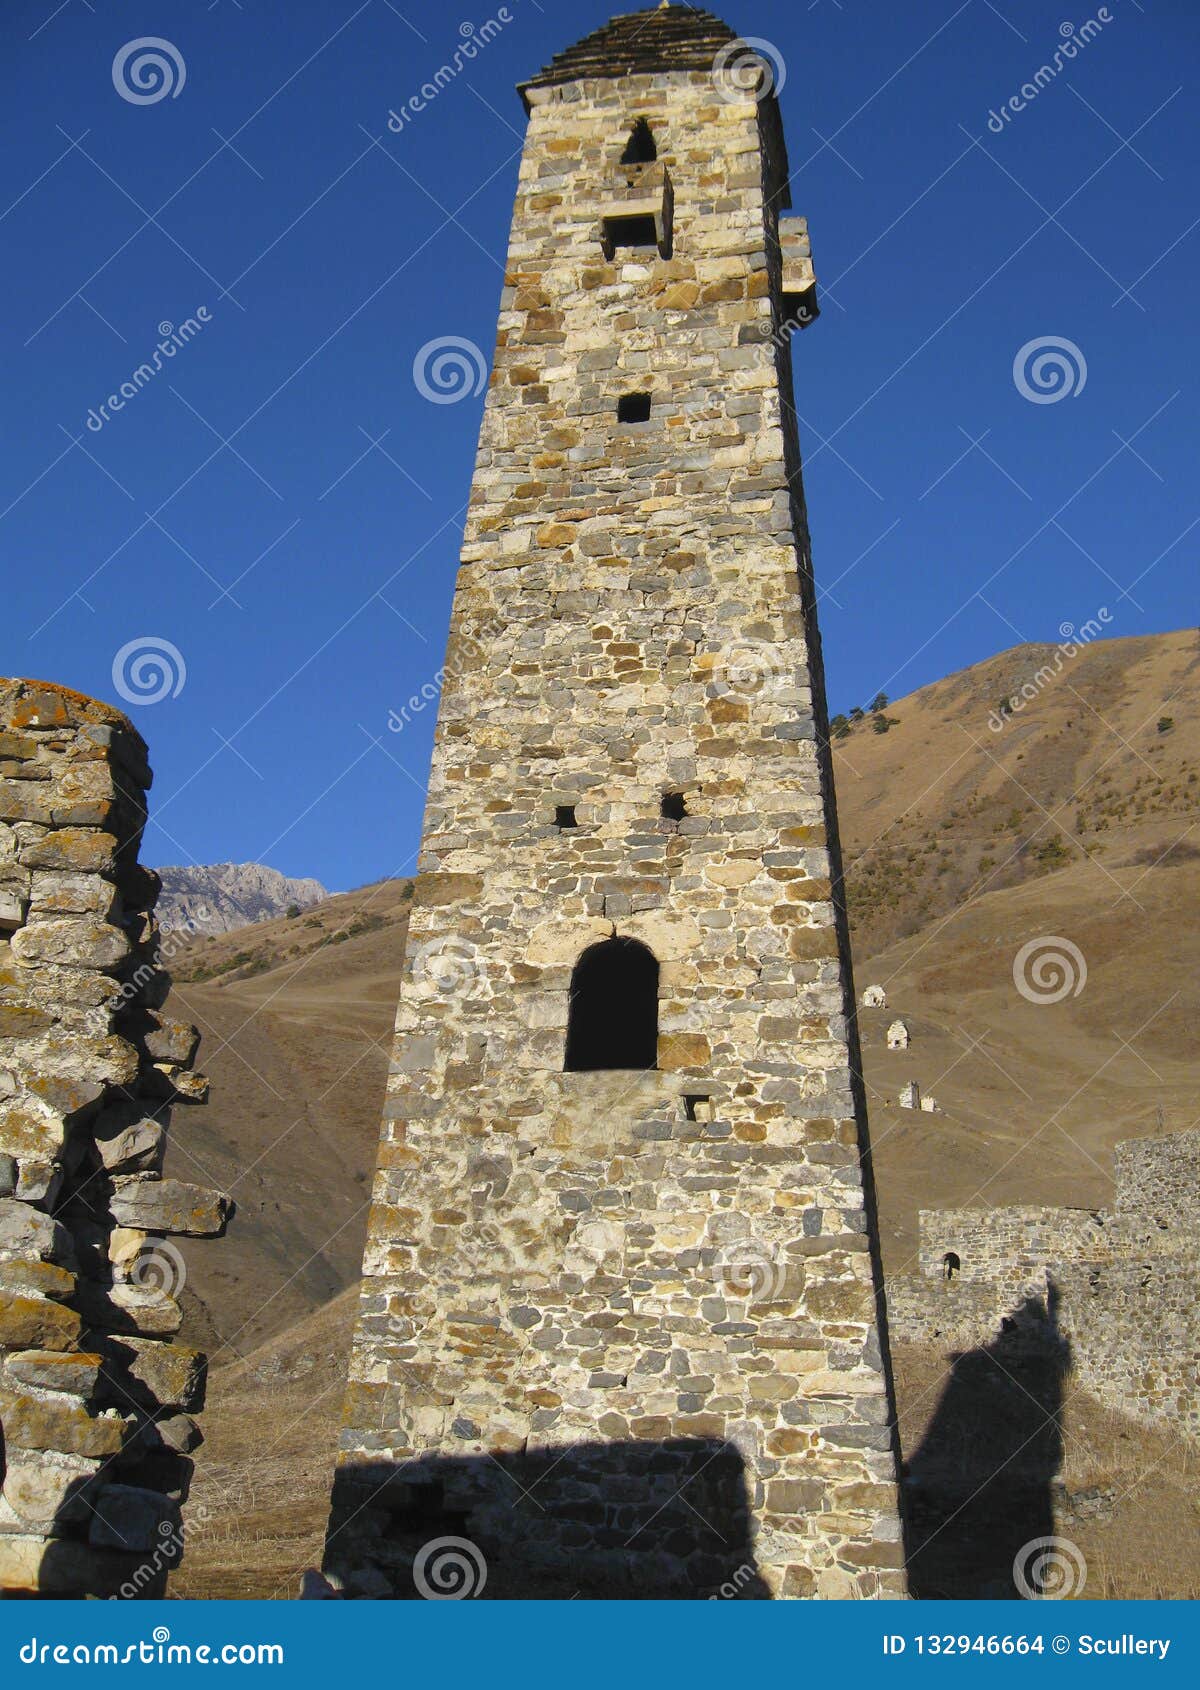 Towers of Ingushetia. Ancient Architecture and Ruins Stock Photo ...